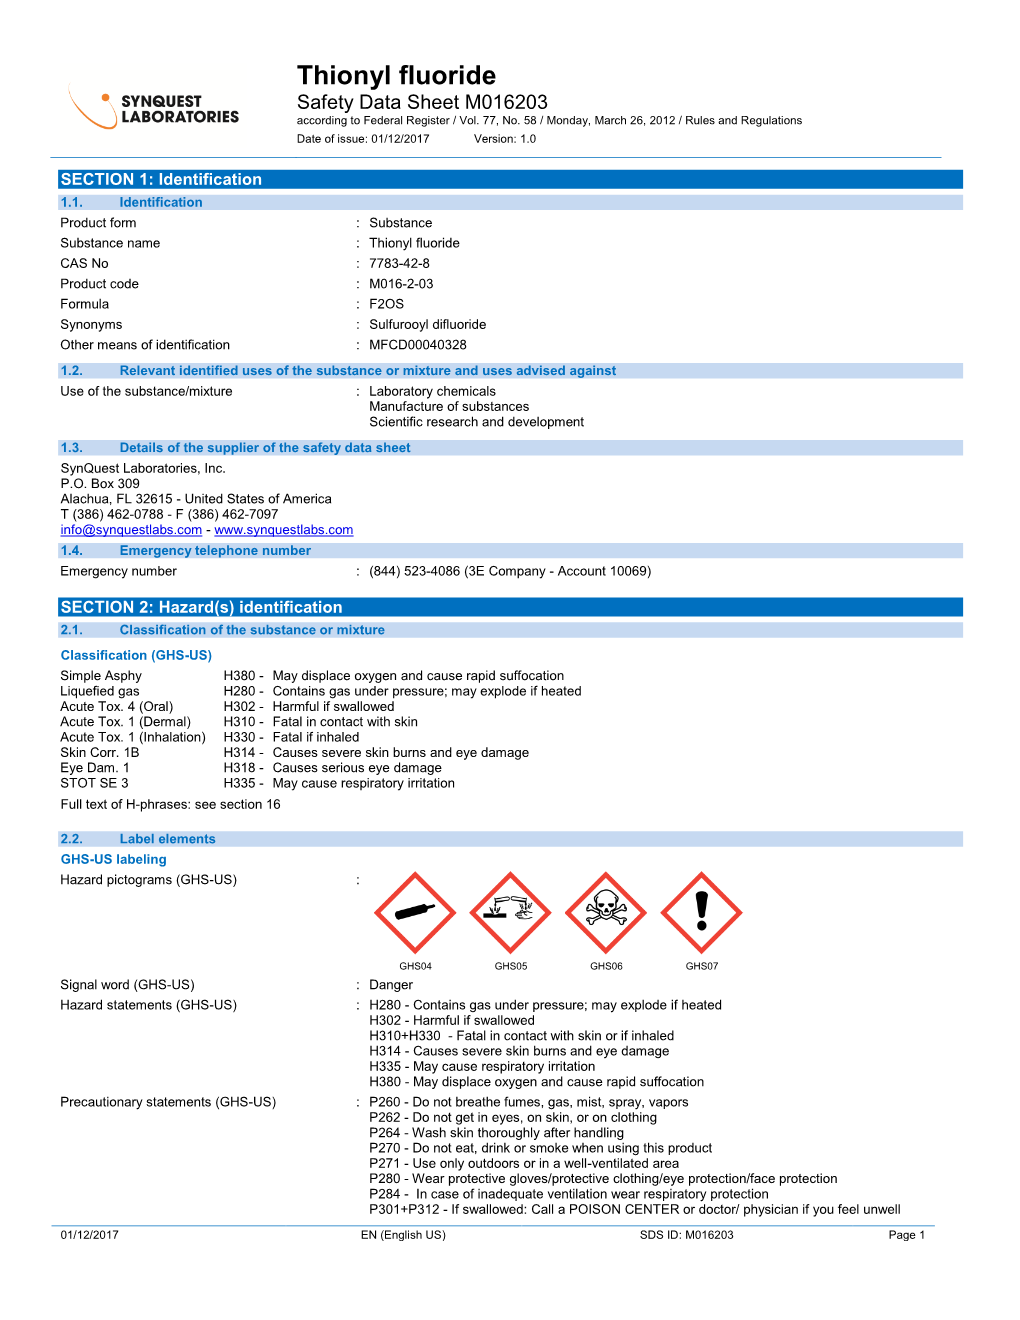 Thionyl Fluoride Safety Data Sheet M016203 According to Federal Register / Vol